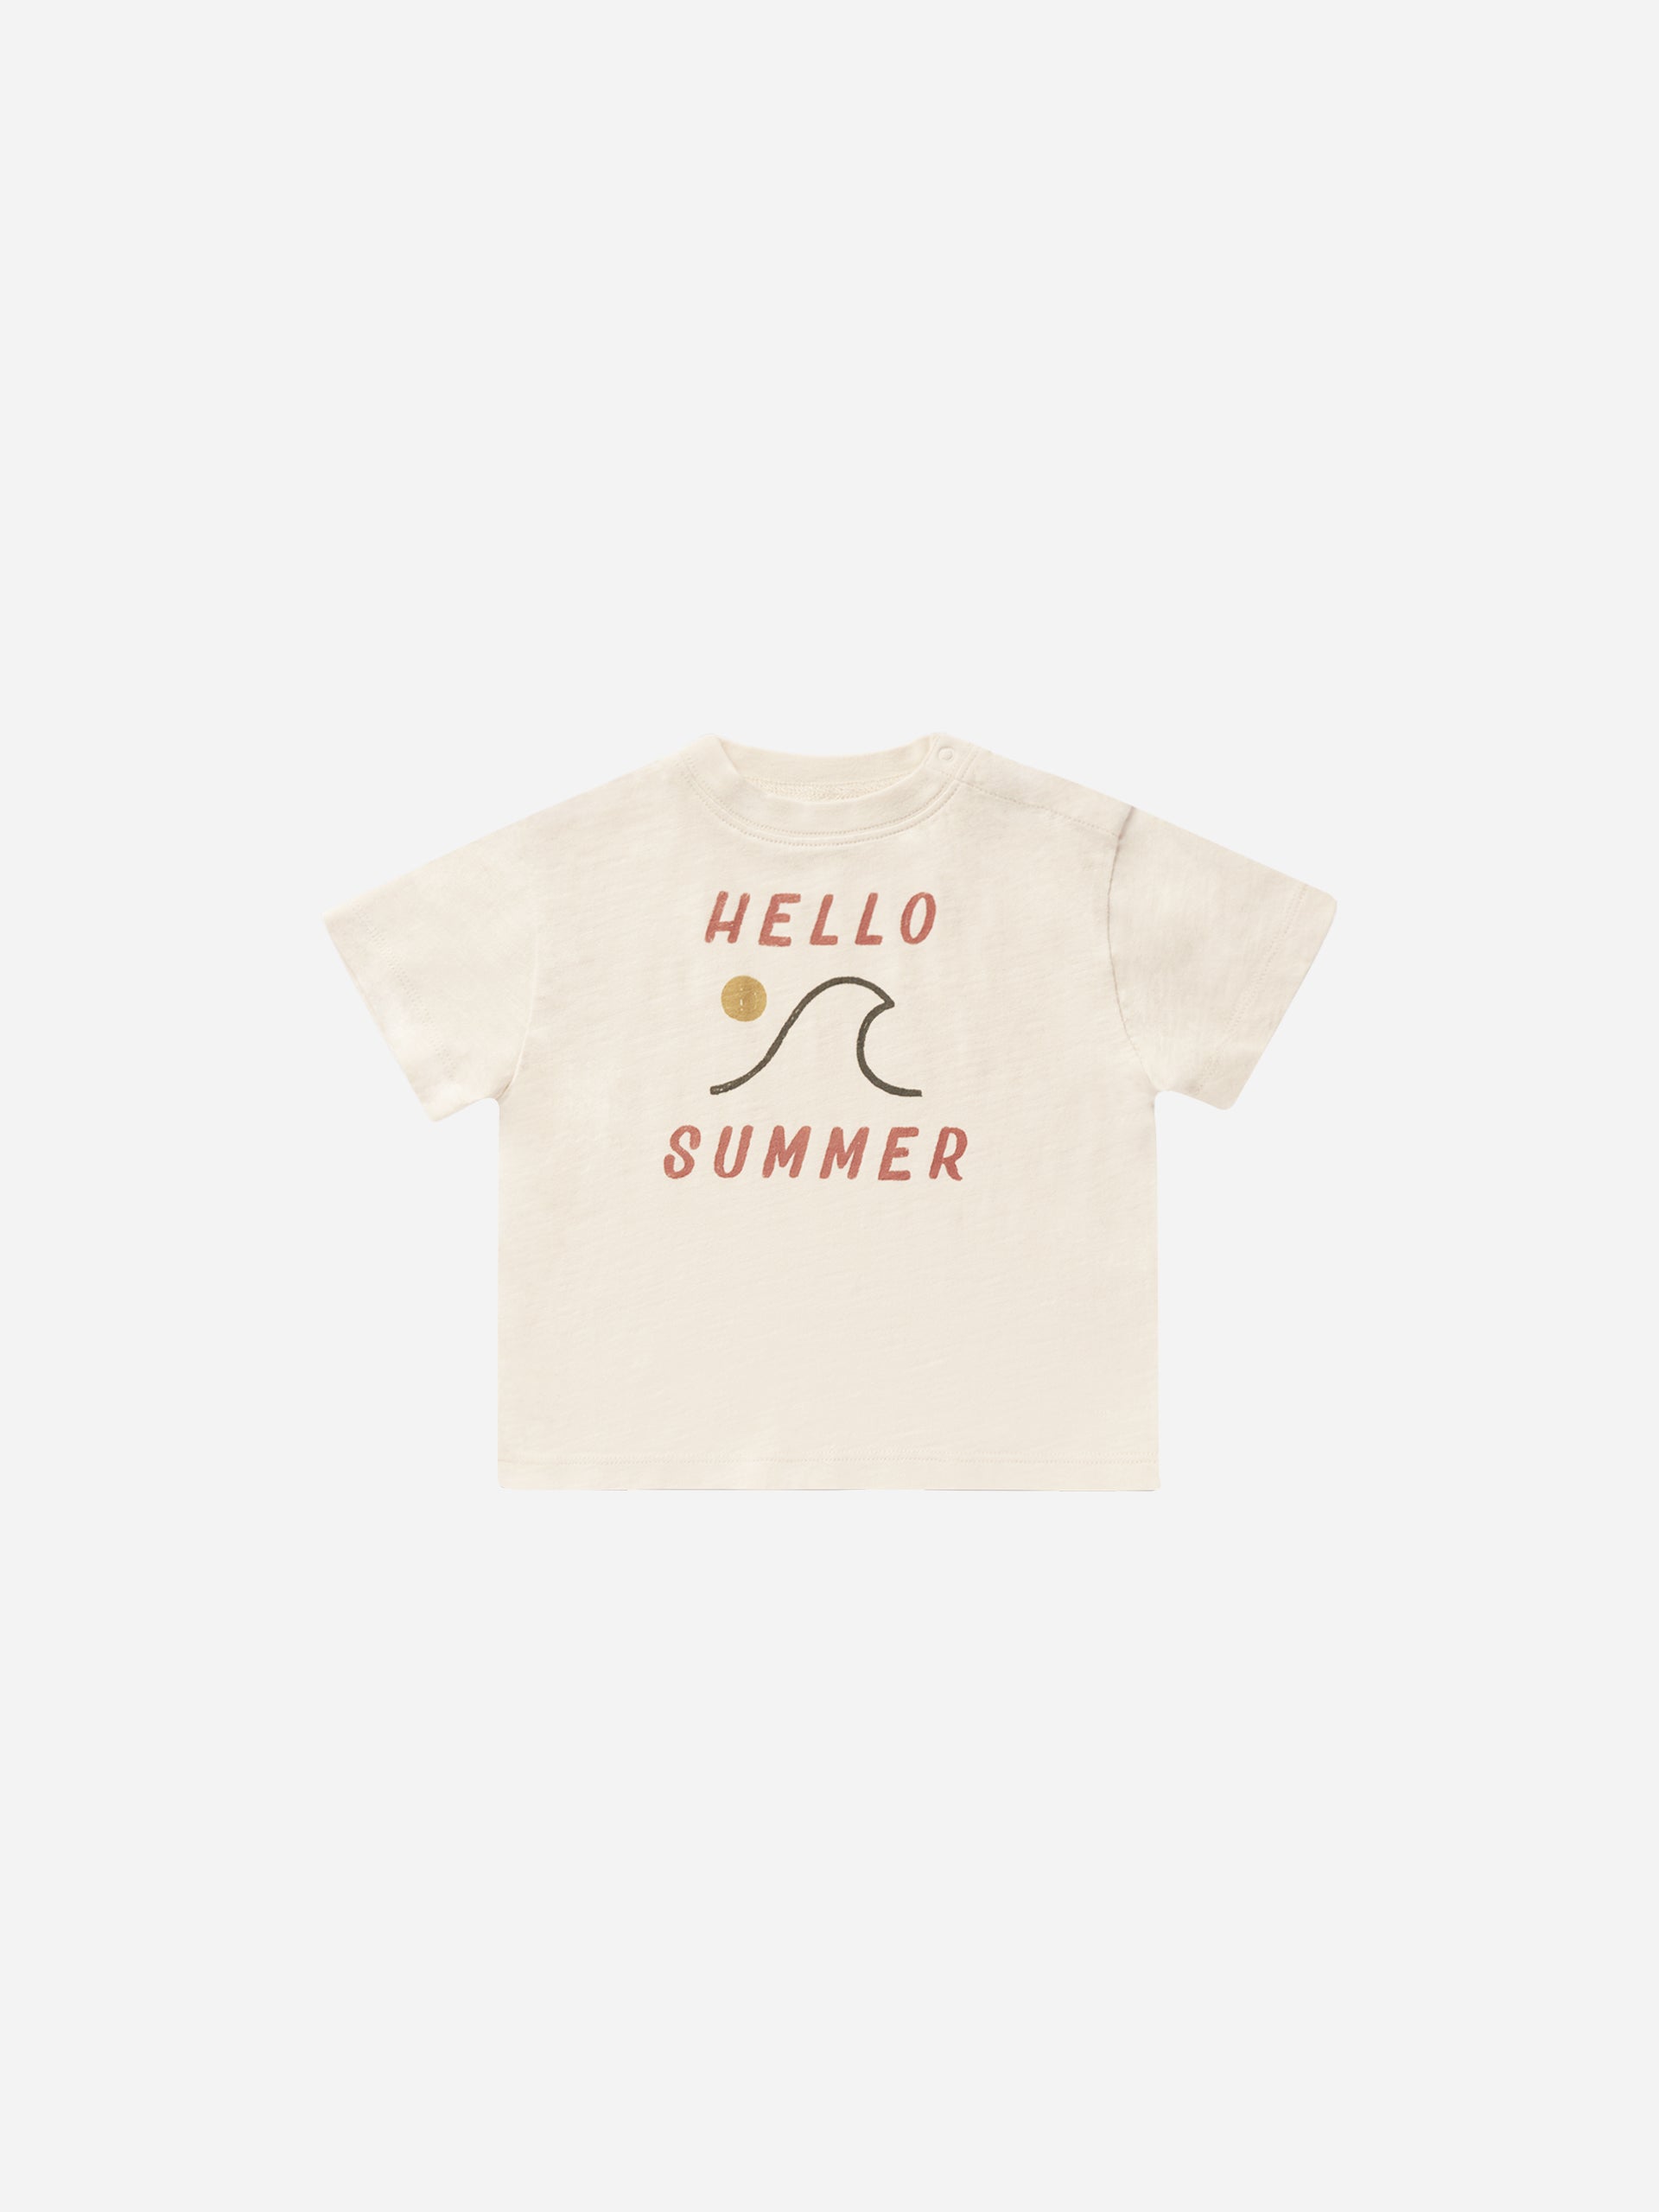 Relaxed Tee || Hello Summer - Rylee + Cru | Kids Clothes | Trendy Baby Clothes | Modern Infant Outfits |